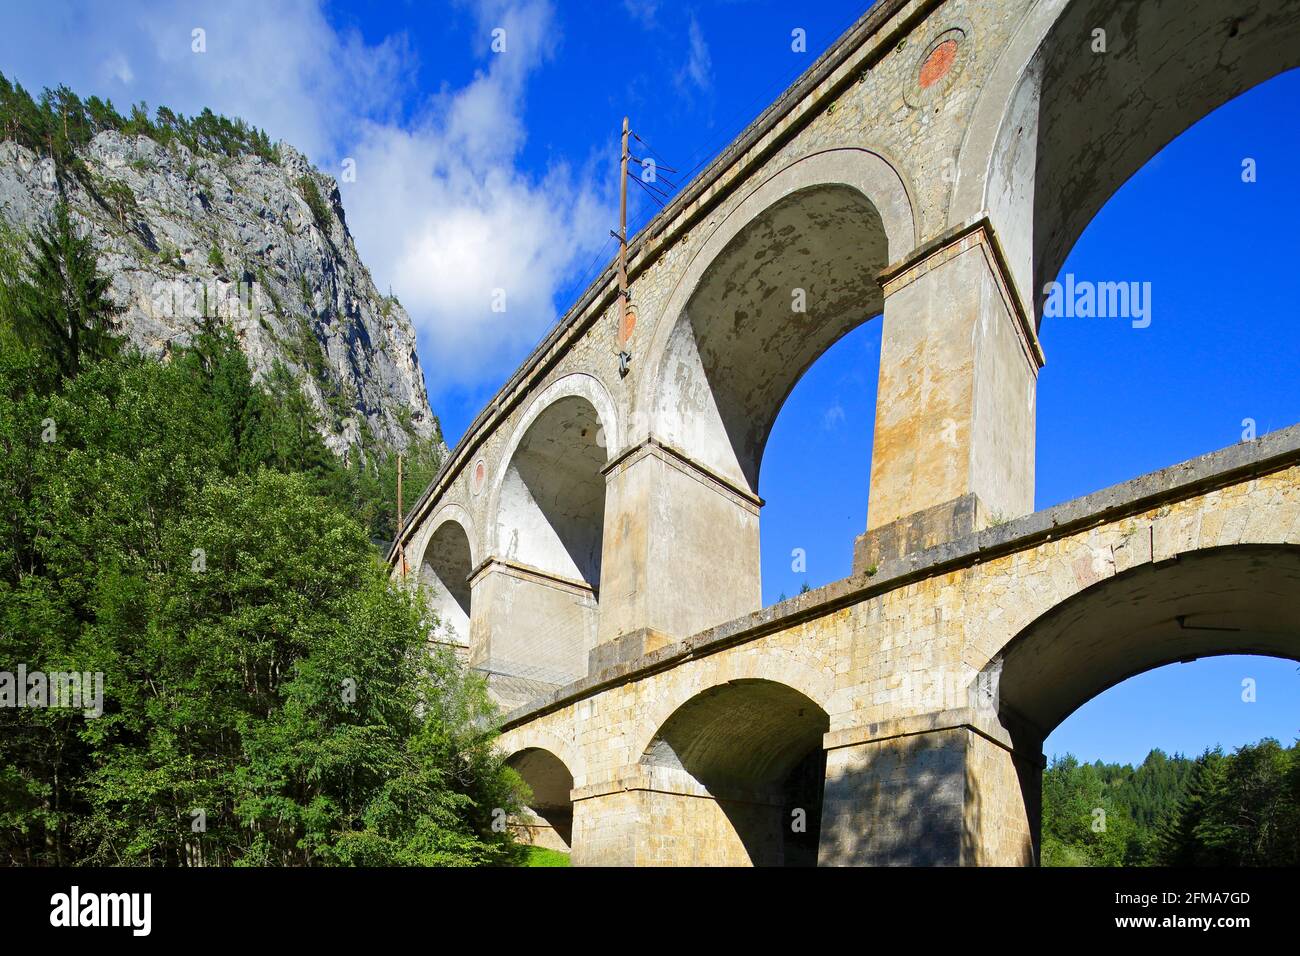 Kalte Rinne Viaduct of the Semmering Railway against blue sky Stock Photo